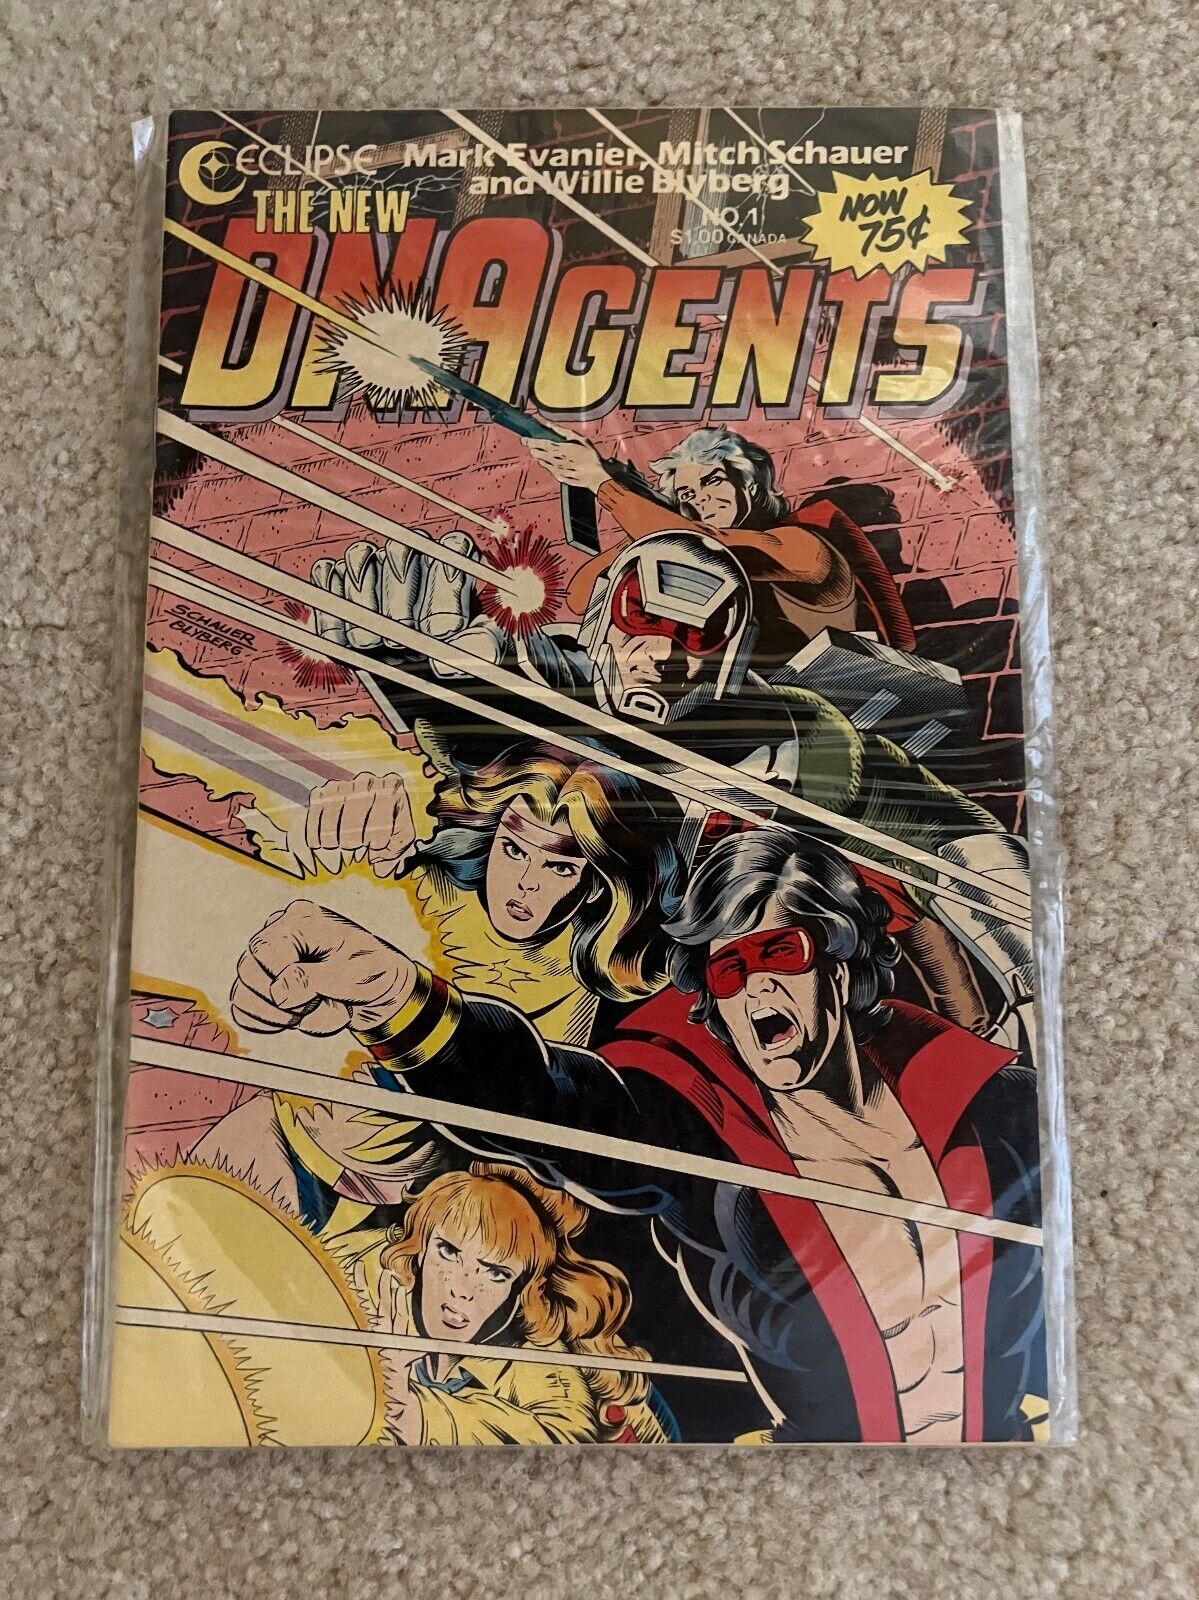 The New DNA Agents #1 (Eclipse Comics 1985) VF or better B&B